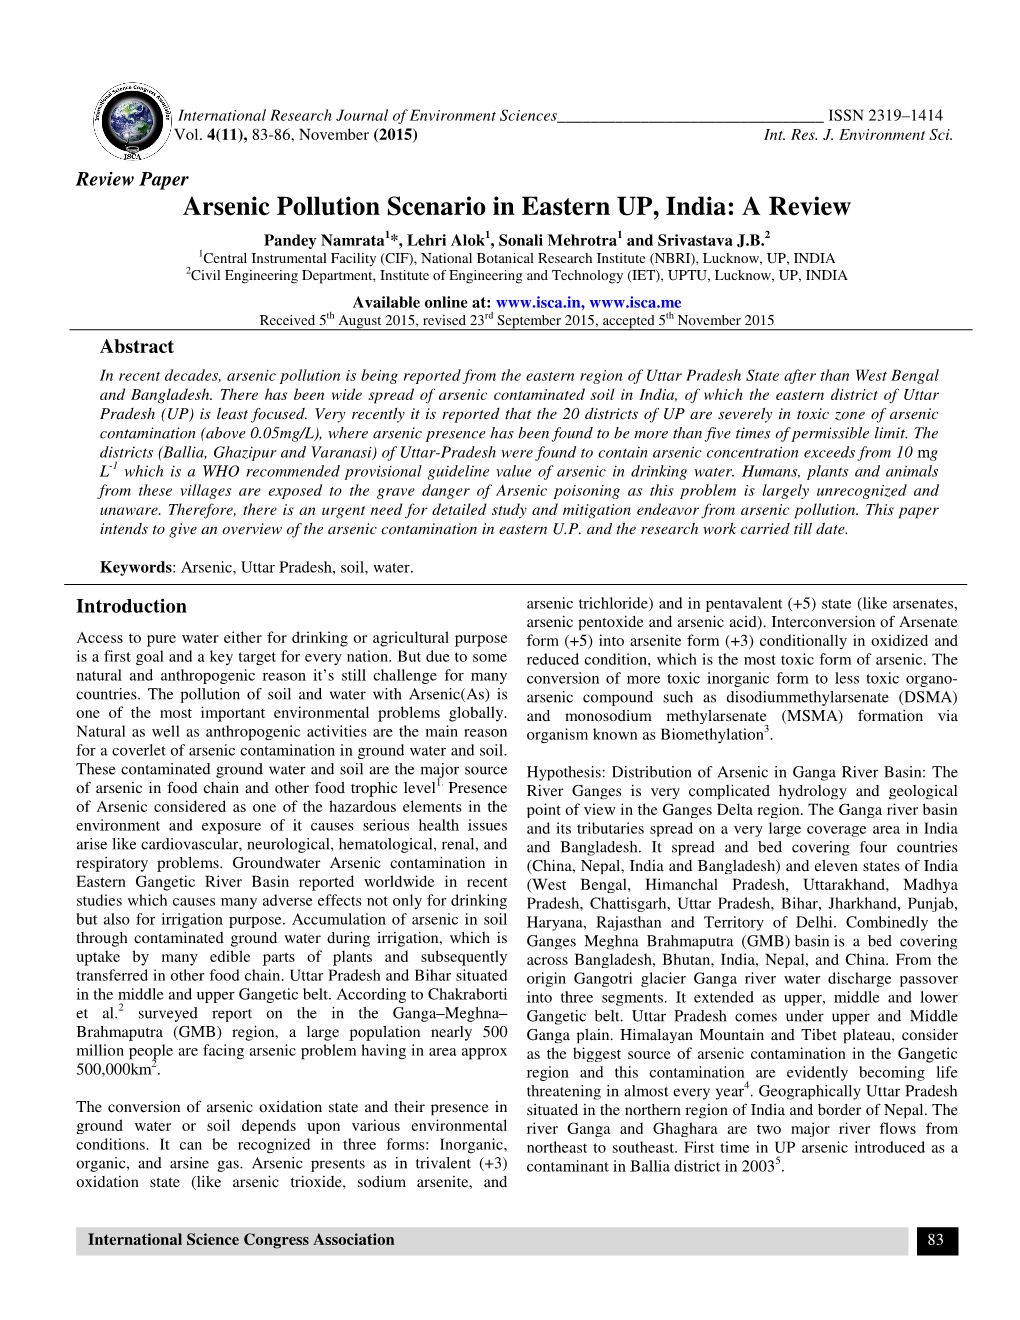 Arsenic Pollution Scenario in Eastern UP, India: a Review